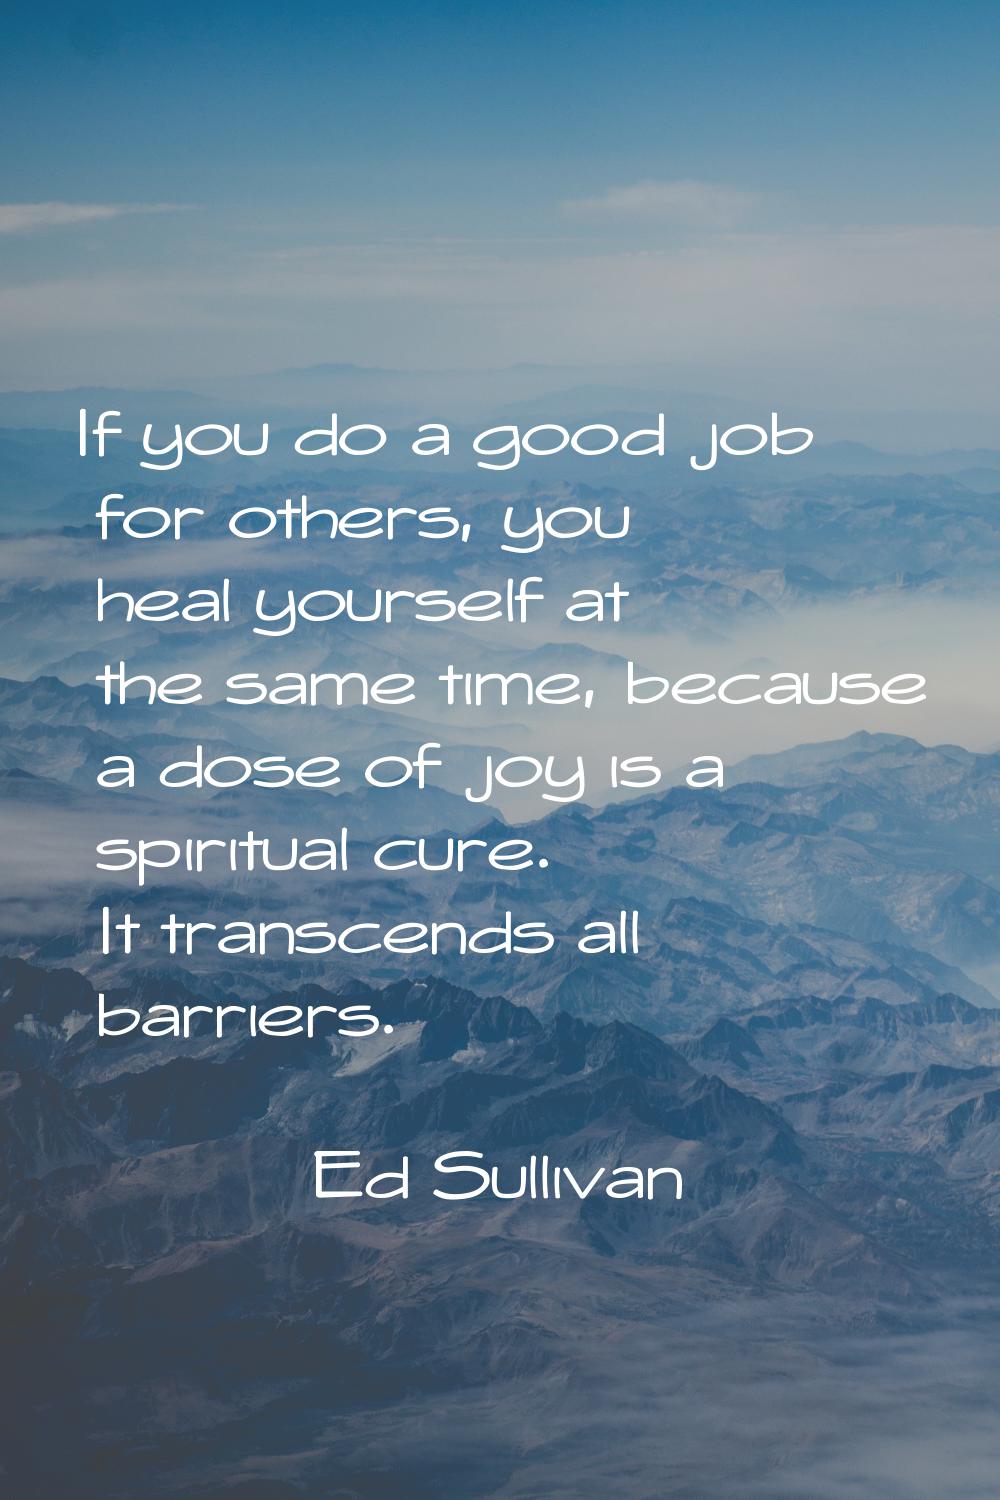 If you do a good job for others, you heal yourself at the same time, because a dose of joy is a spi